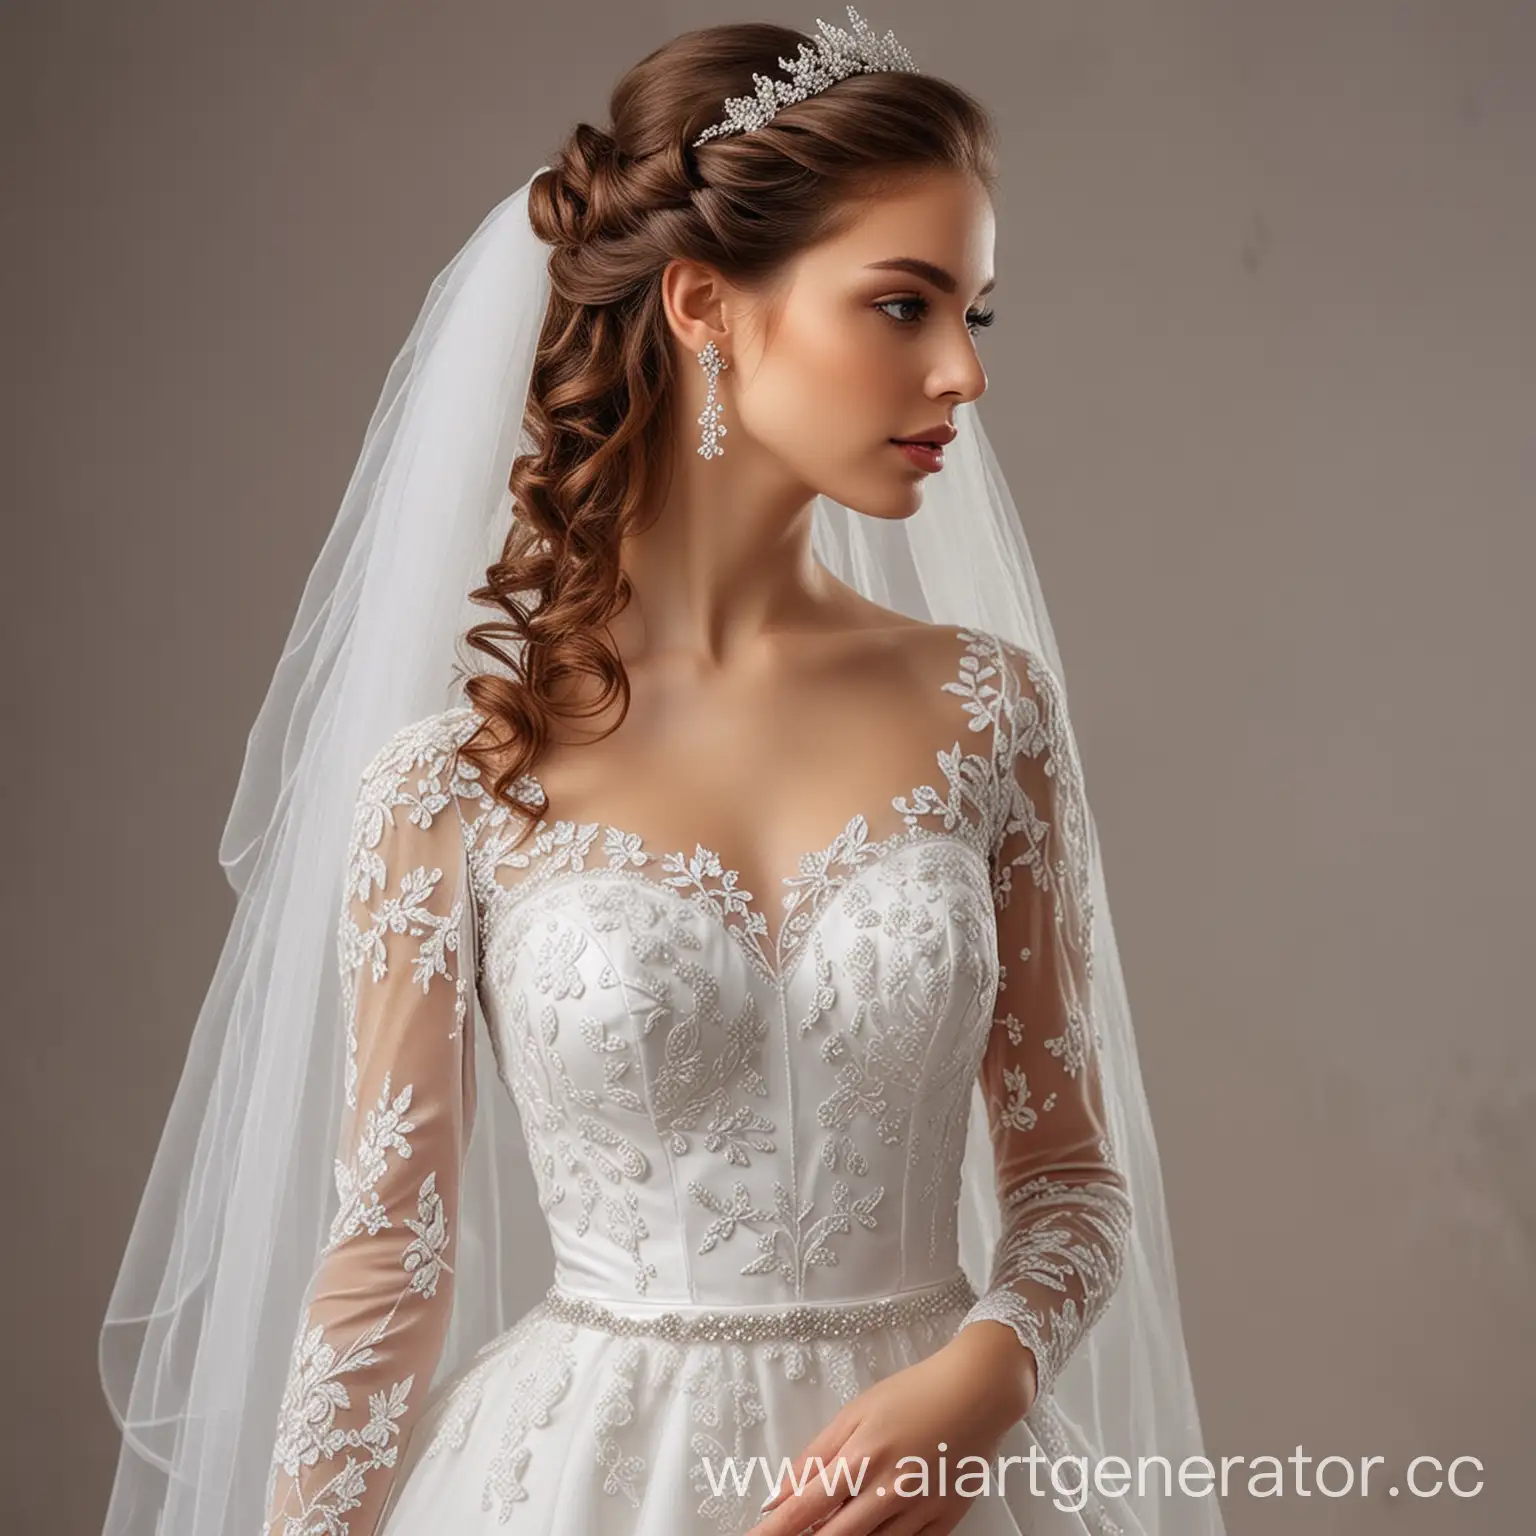 Elegant-Bride-in-Smooth-Long-Wedding-Dress-with-Veil-and-Neat-Hairstyle